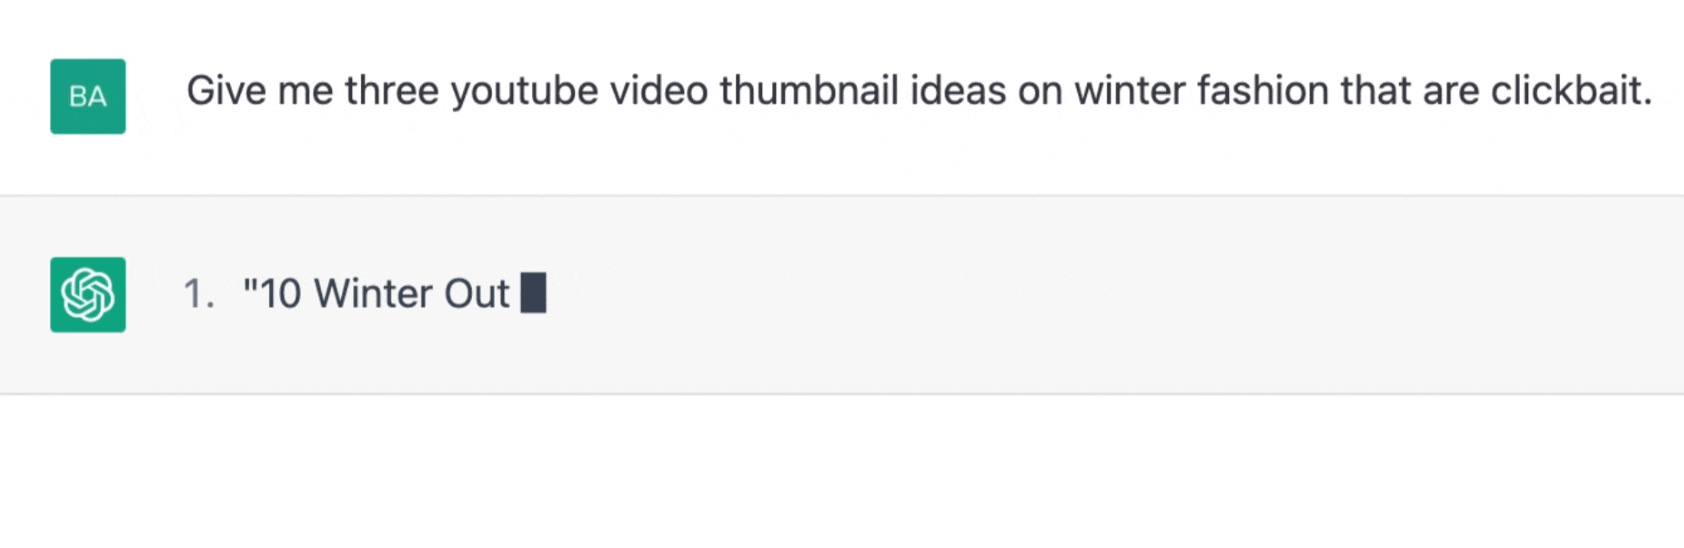 ChatGPT prompt about asking for youtube video thumbnail ideas